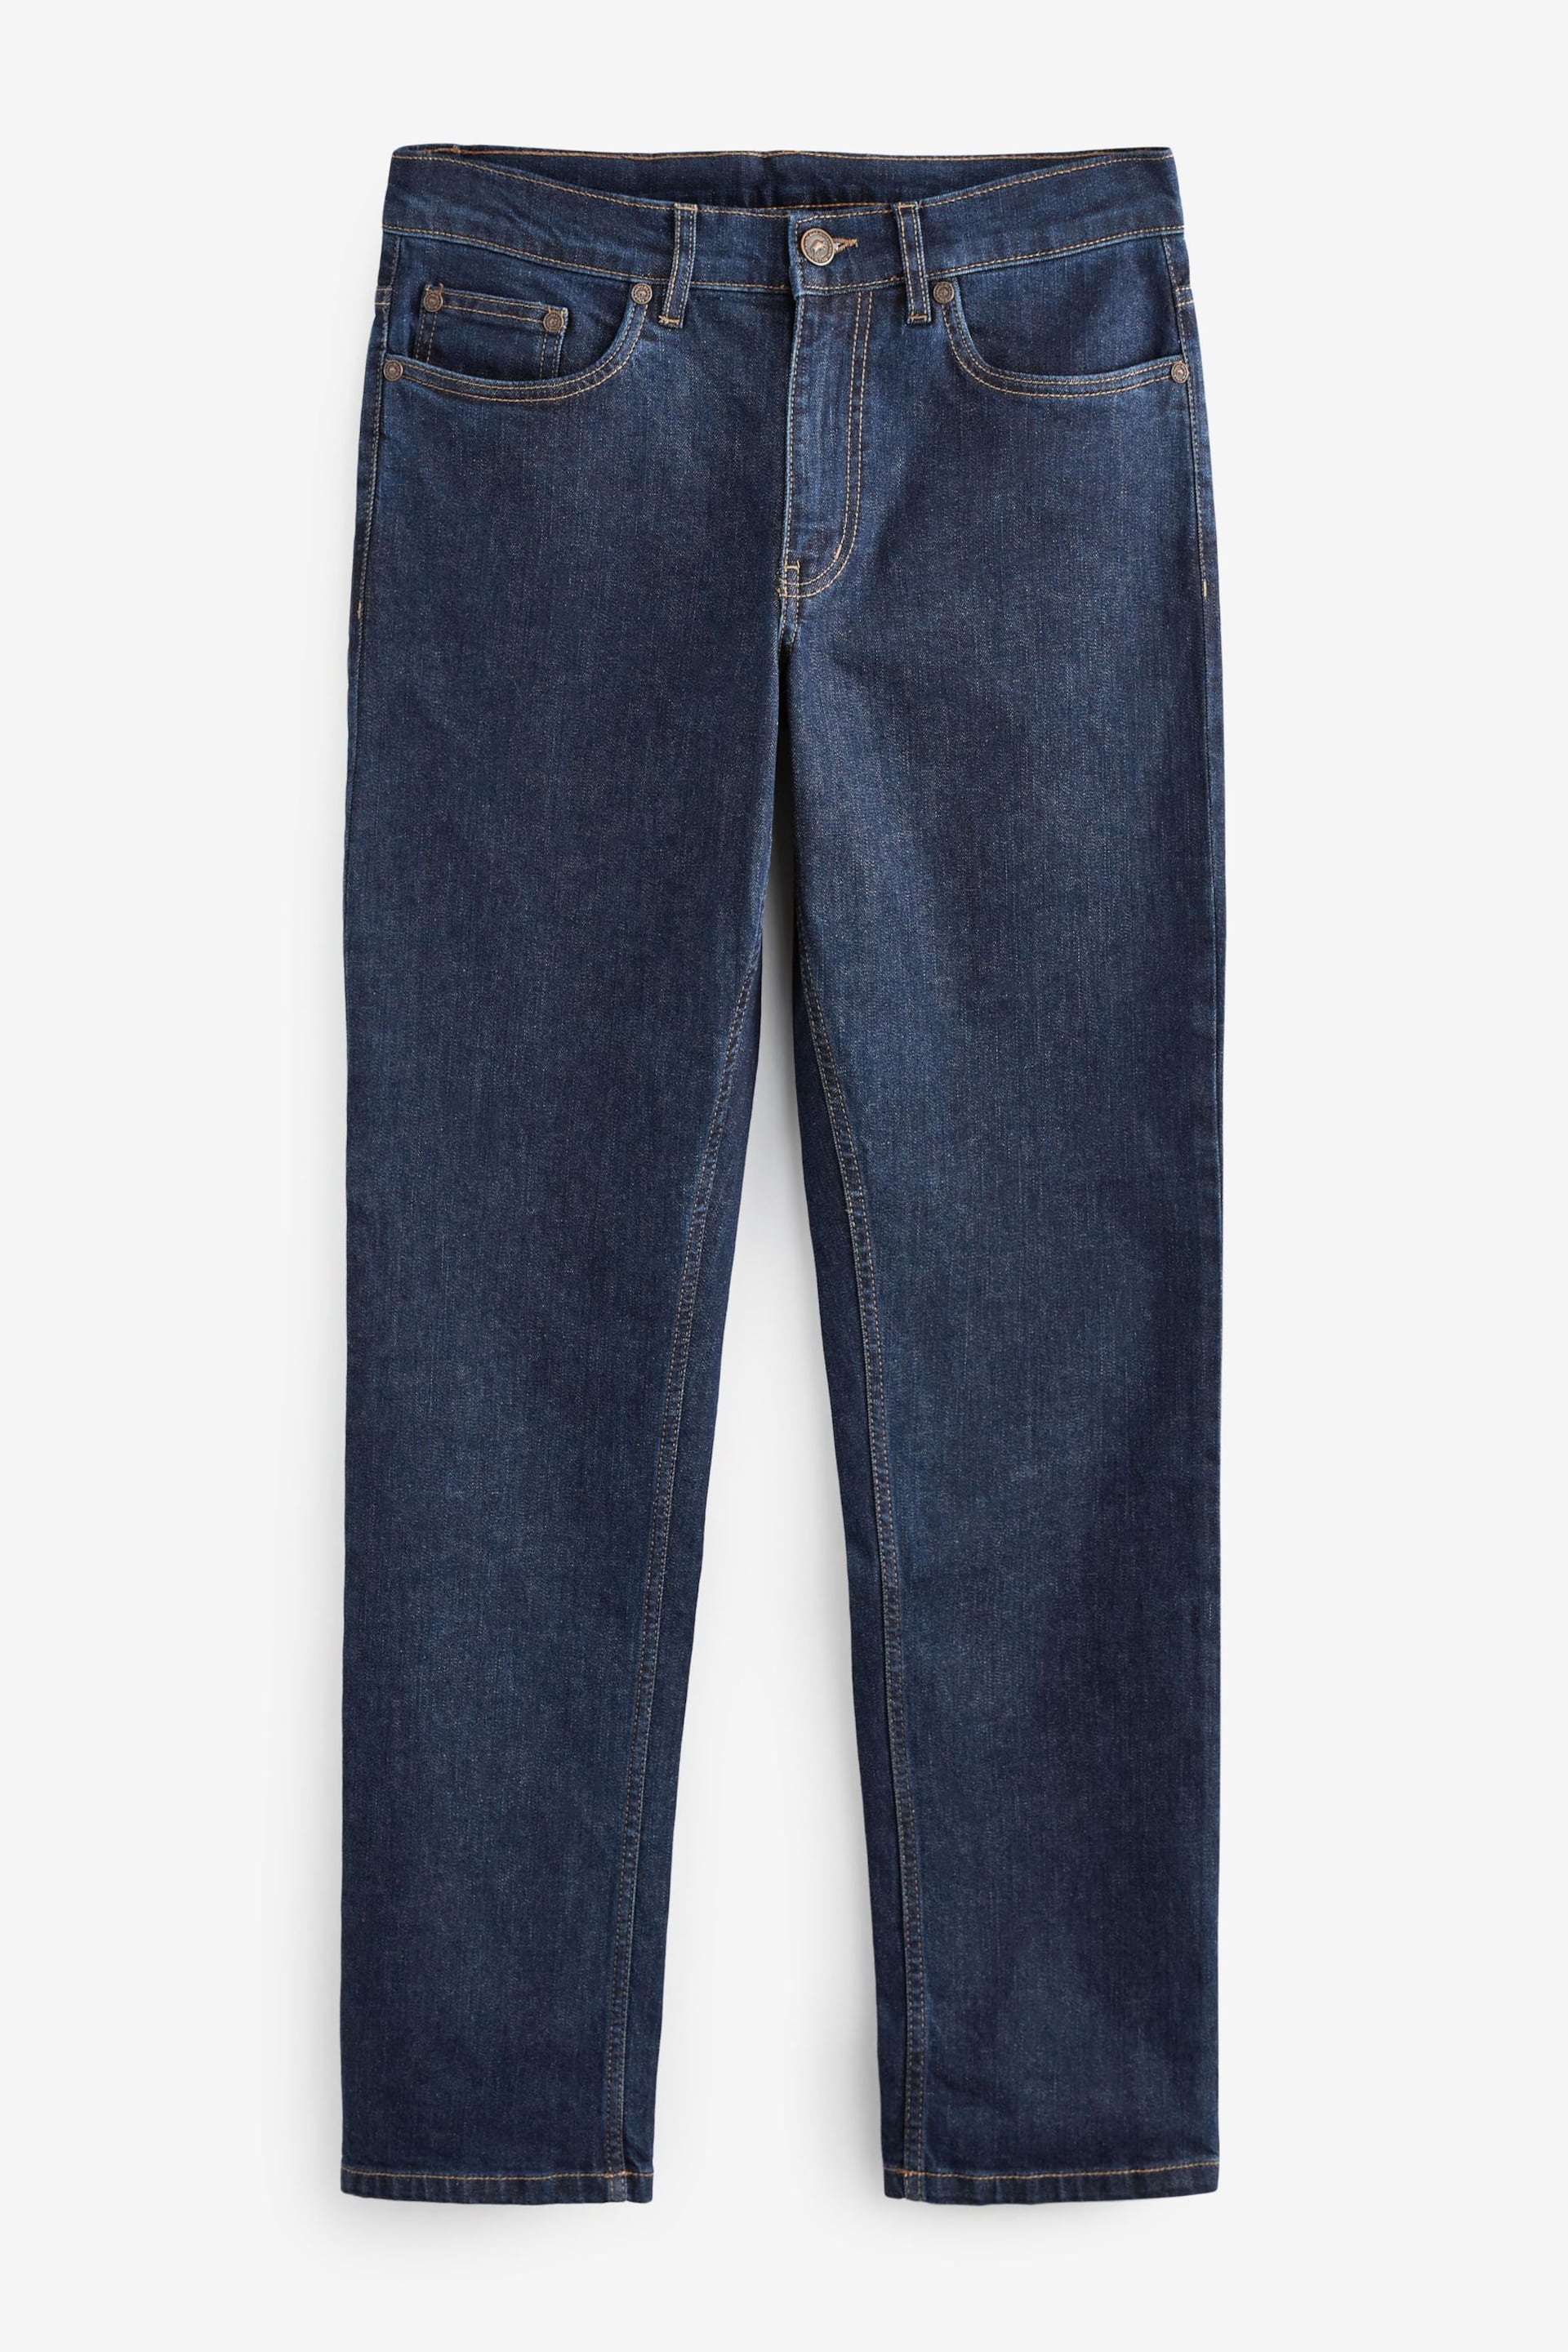 Raging Bull Blue Tapered Jeans - Image 3 of 6